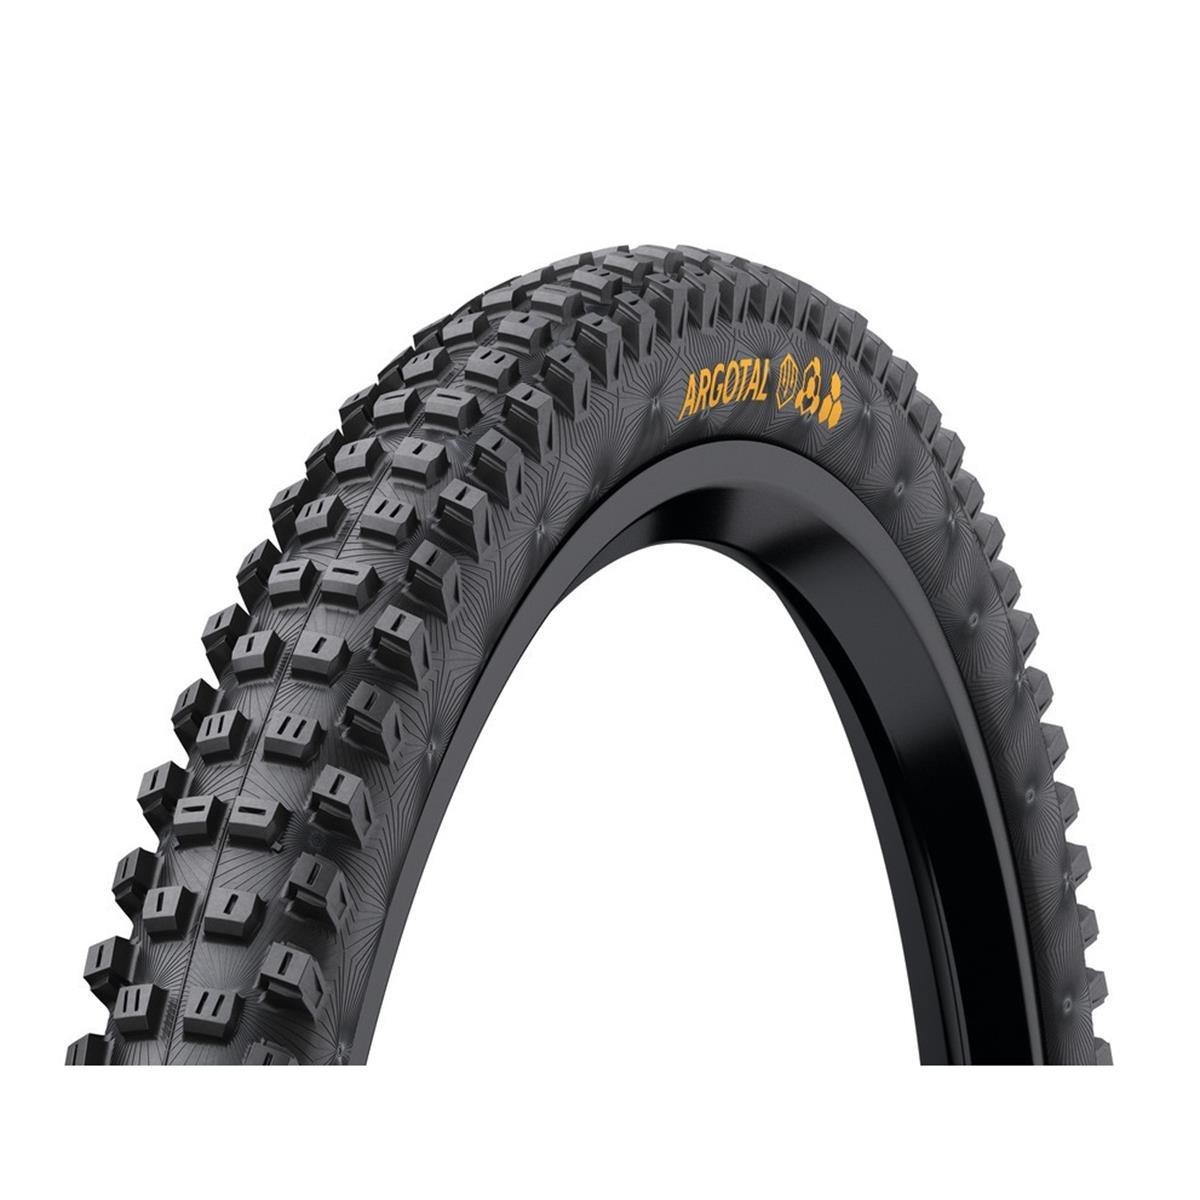 Dronken worden vers tijdschrift Continental MTB Tire Argotal Trail Black, 27.5 x 2.6 Inches, Tubeless  Ready, Endurance, Foldable | Maciag Offroad